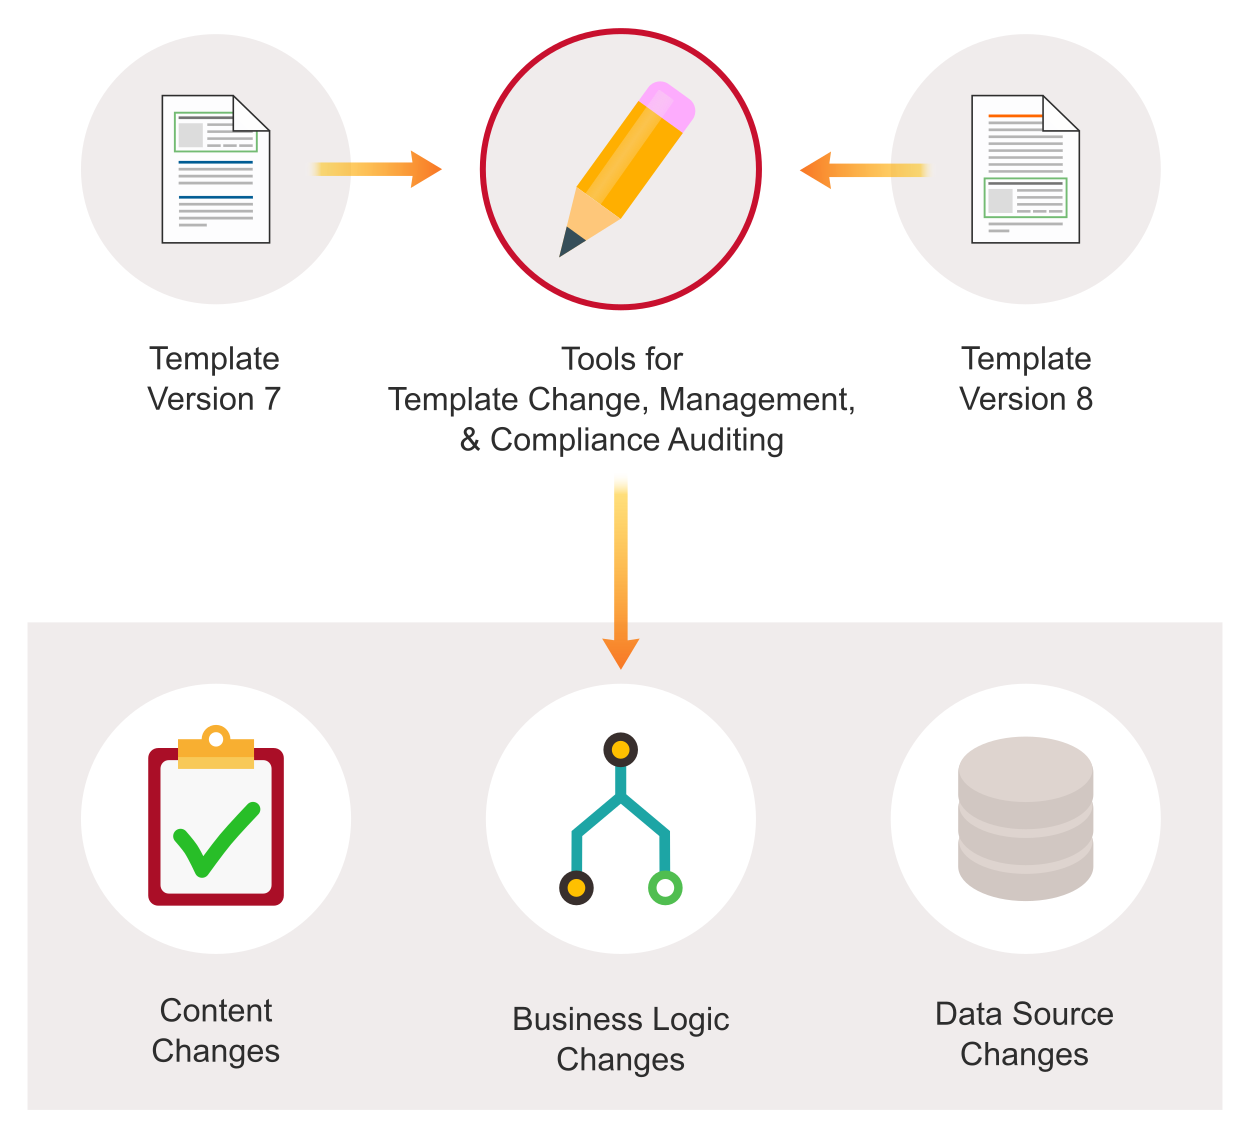 It is important to be able to track and audit changes made to automated templates